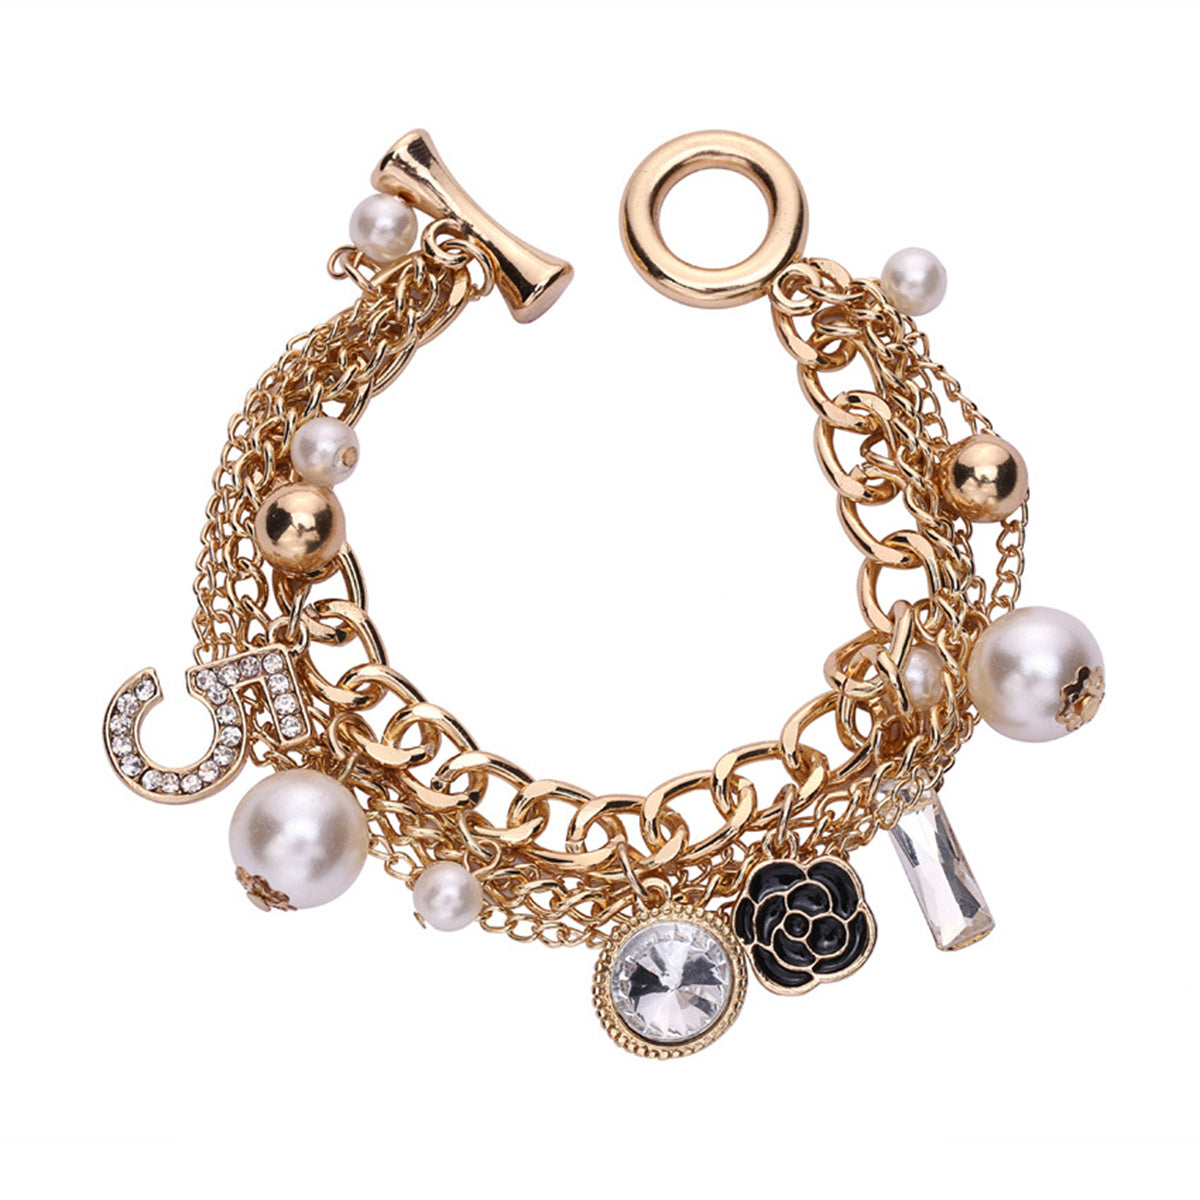 Golden Multi-Layer Chain Bracelets for Womens Beading Hand Chain Tennis Bracelet with pearls and a flower Pendant Ladies Jewelry